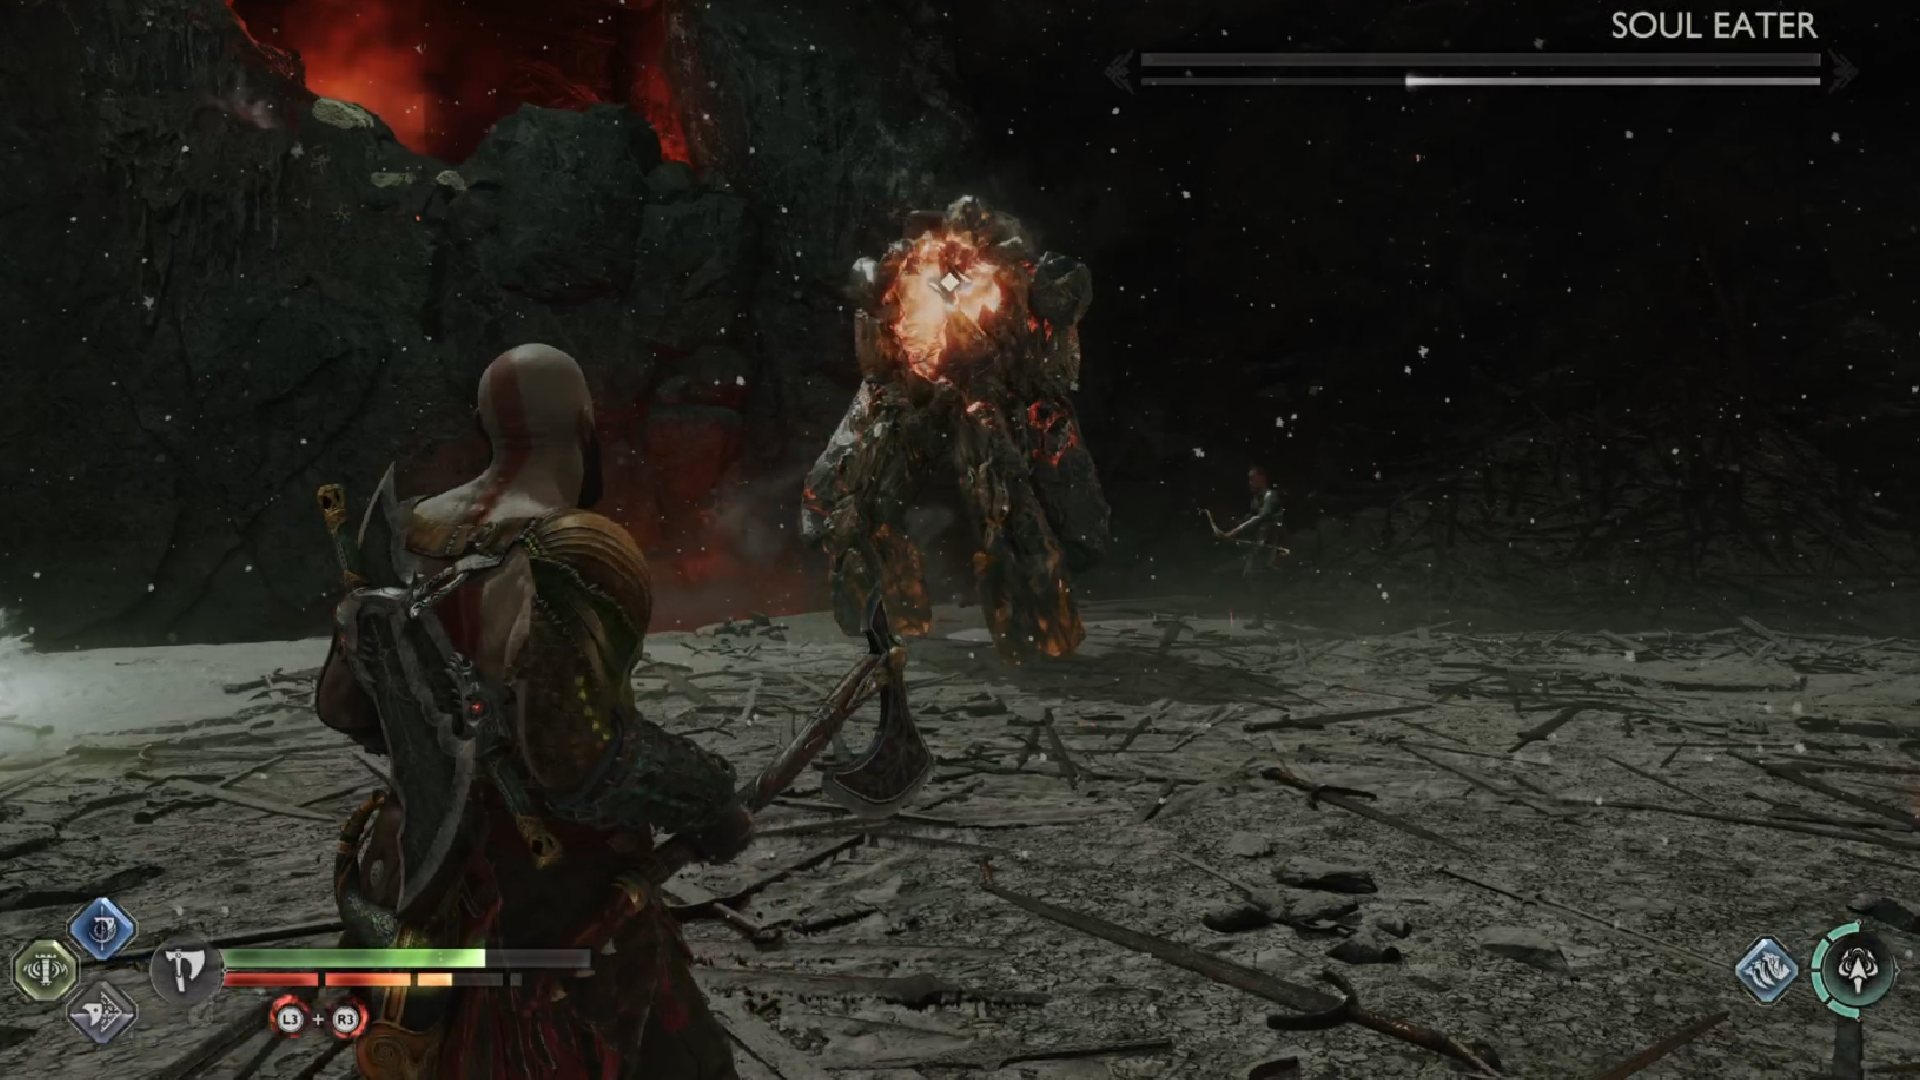 God of War Ragnarok Chaos Flame Locations: Kratos can be seen fighting a Soul Eater